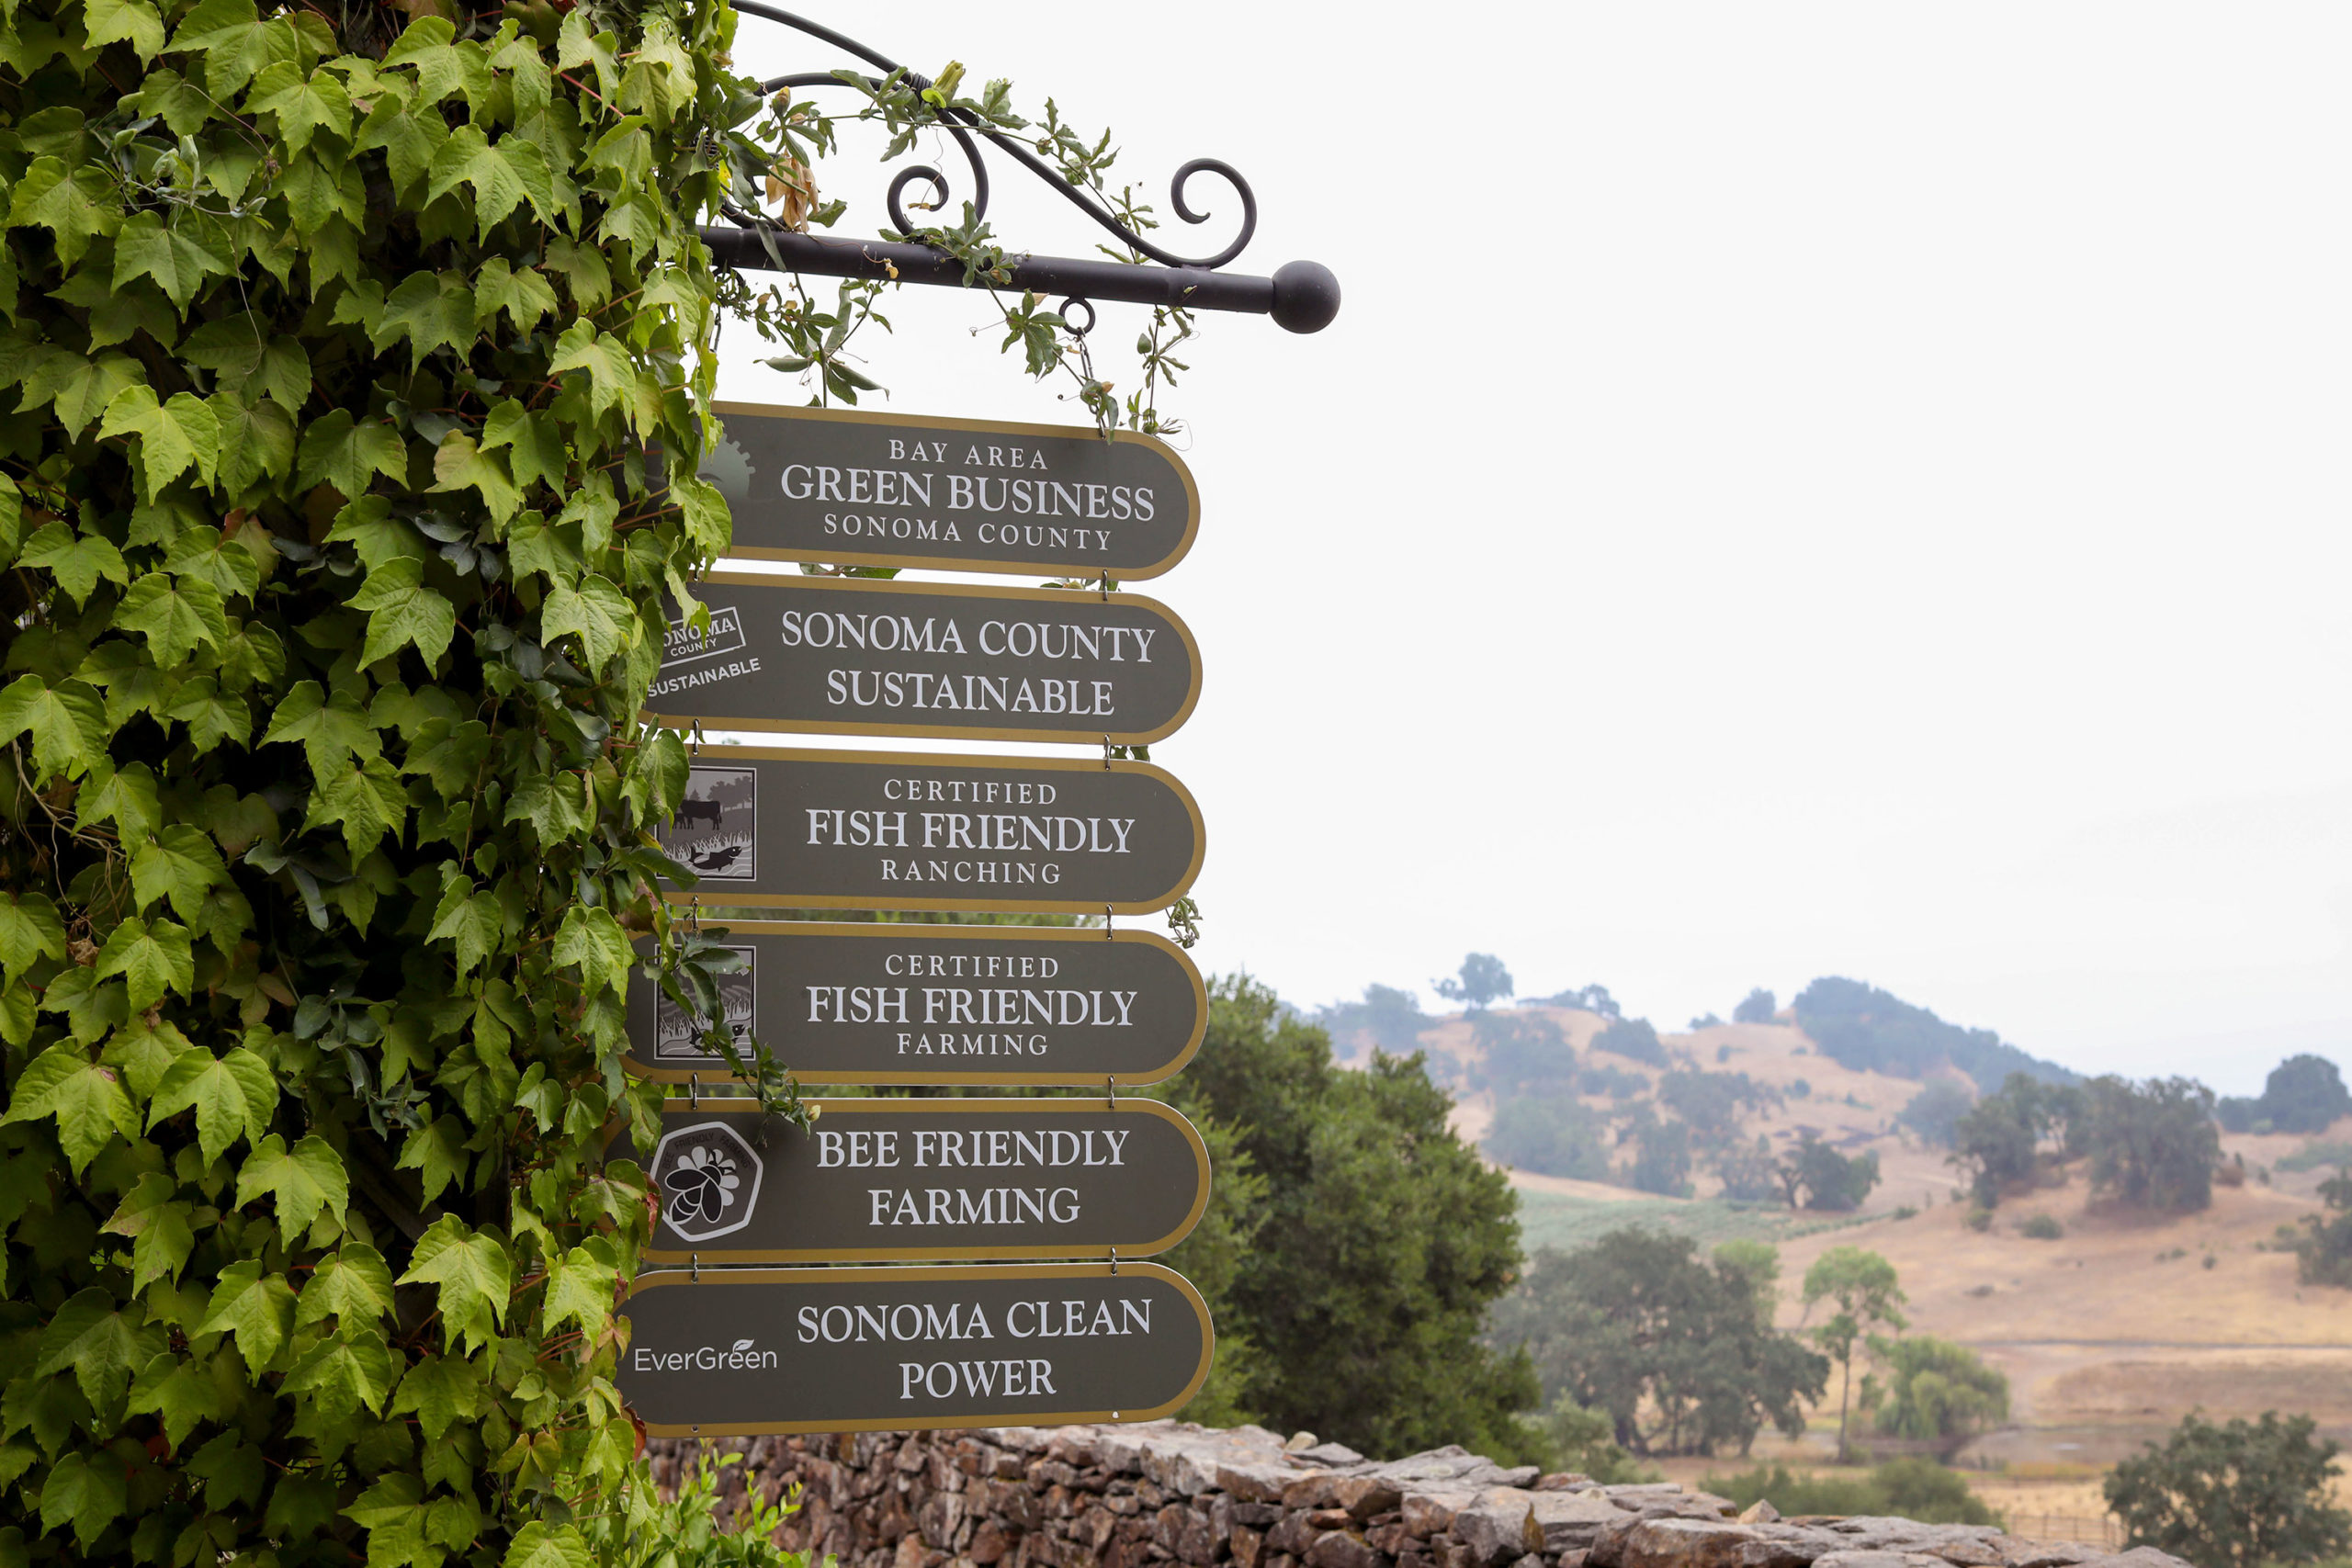 Sign showing the green business certifications that Jordan Winery has earned